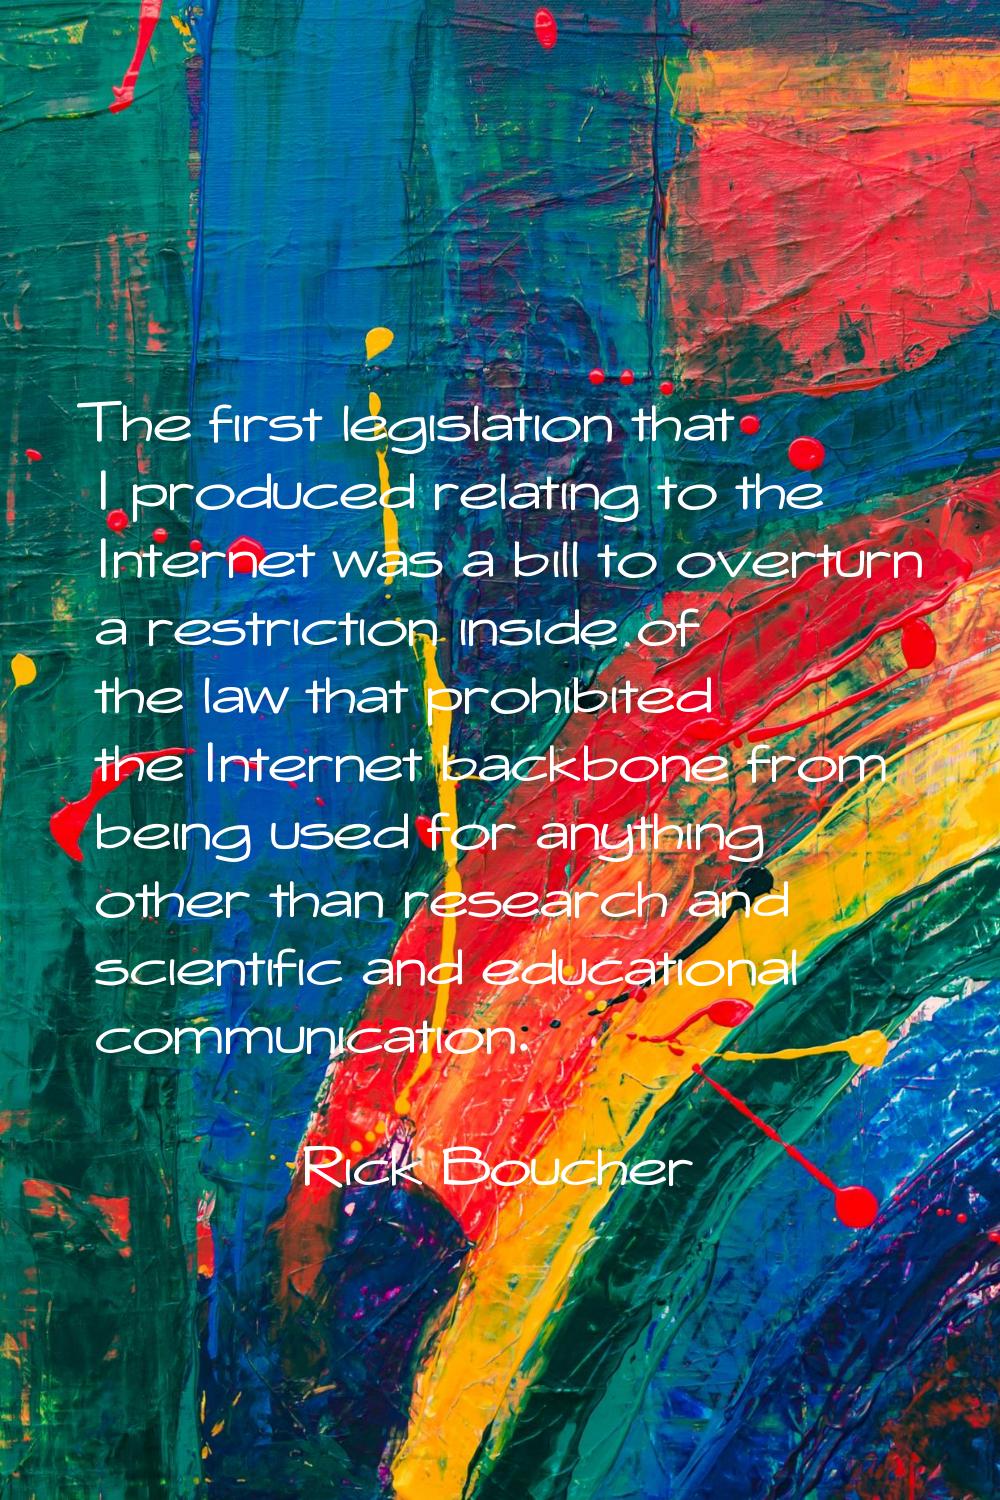 The first legislation that I produced relating to the Internet was a bill to overturn a restriction